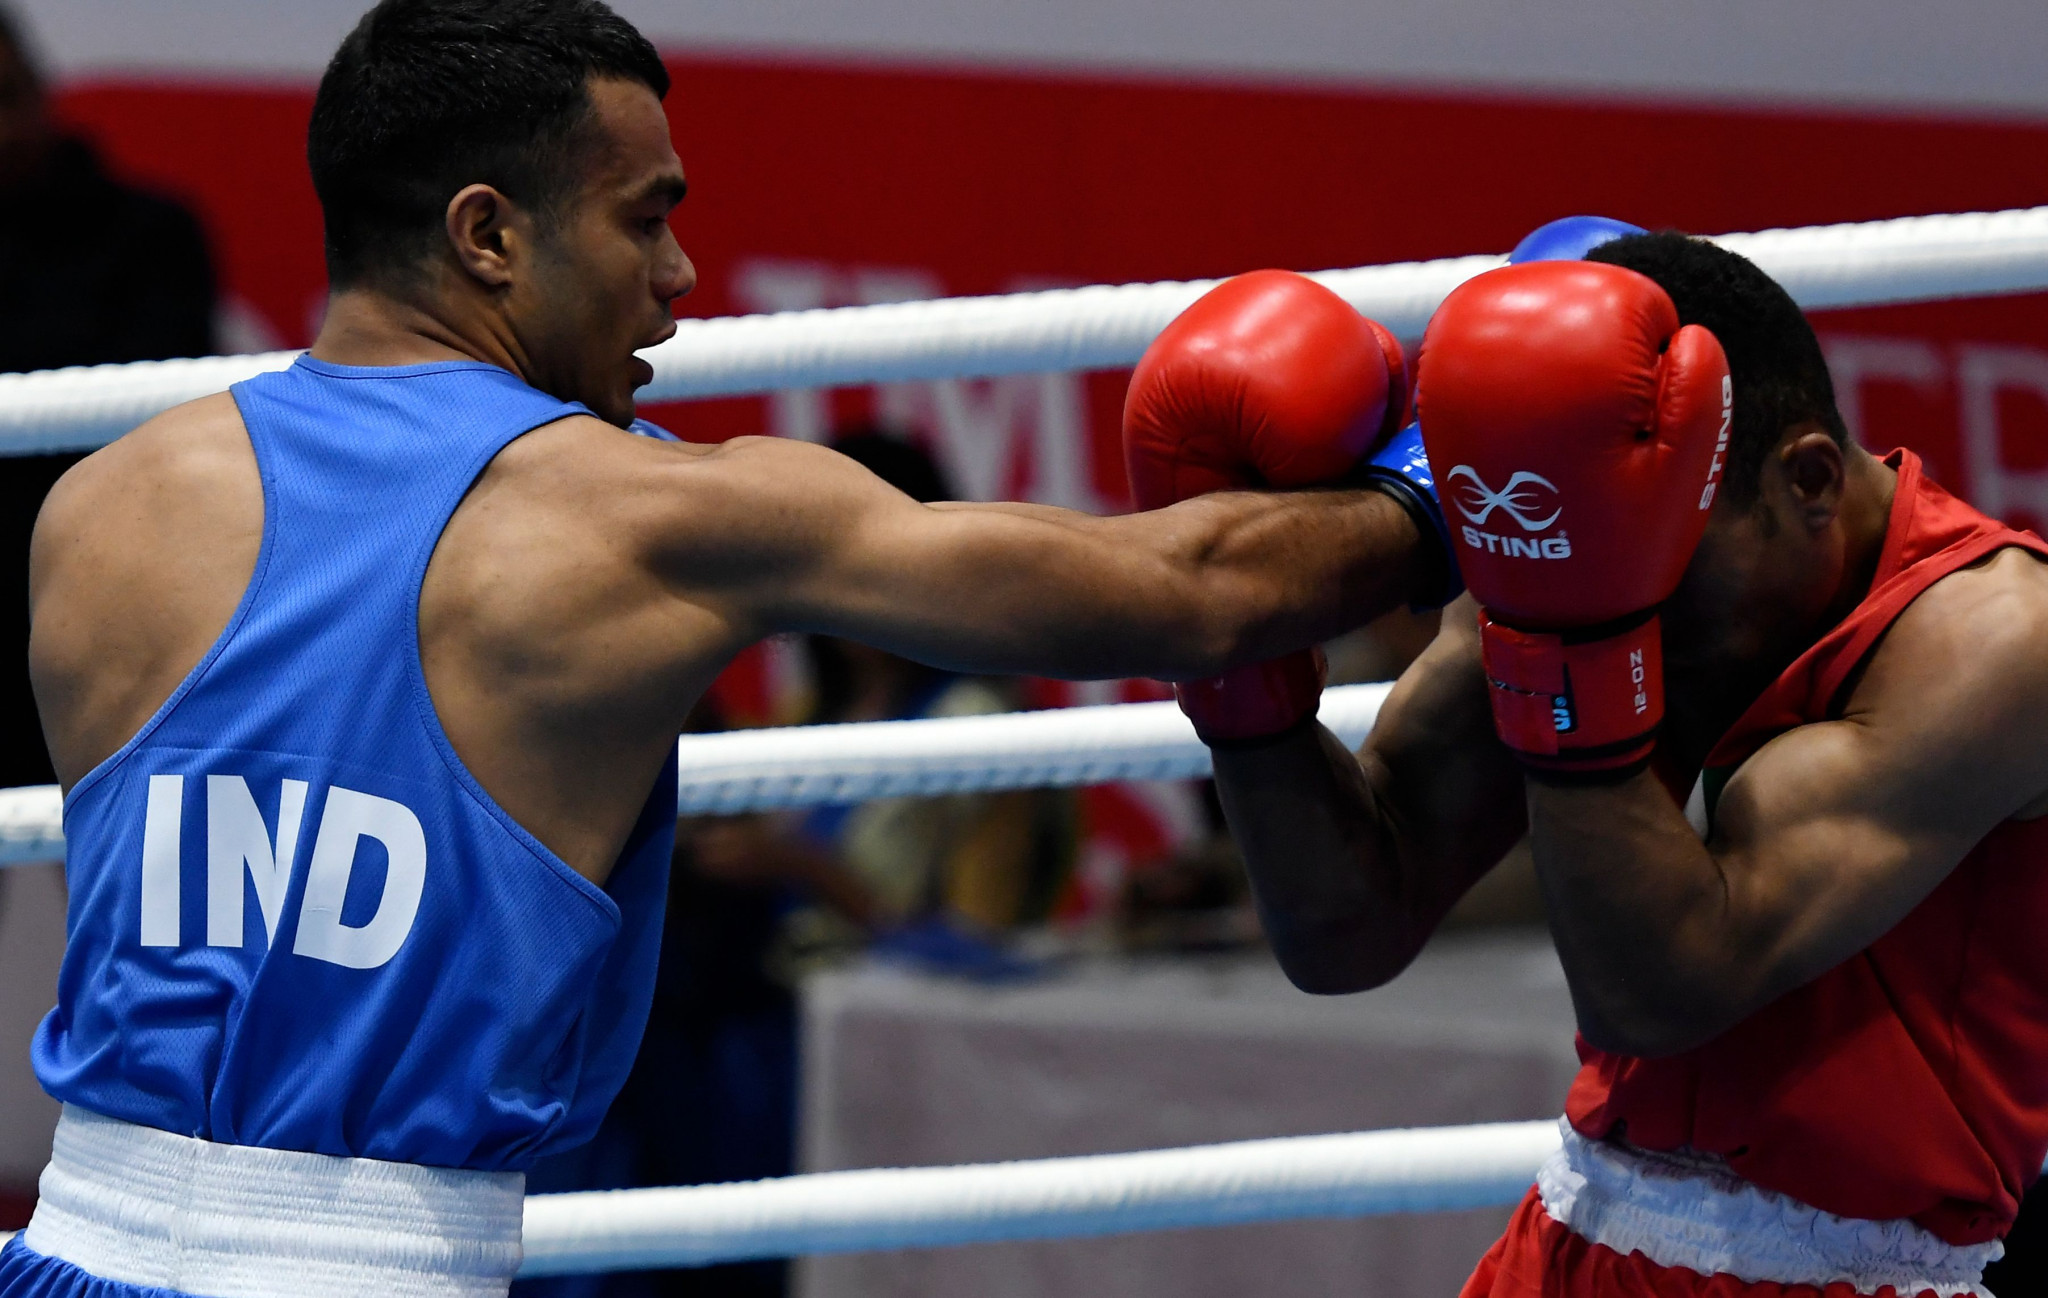 AIBA send observer to ensure Boxing Federation of India hold "free and fair" elections